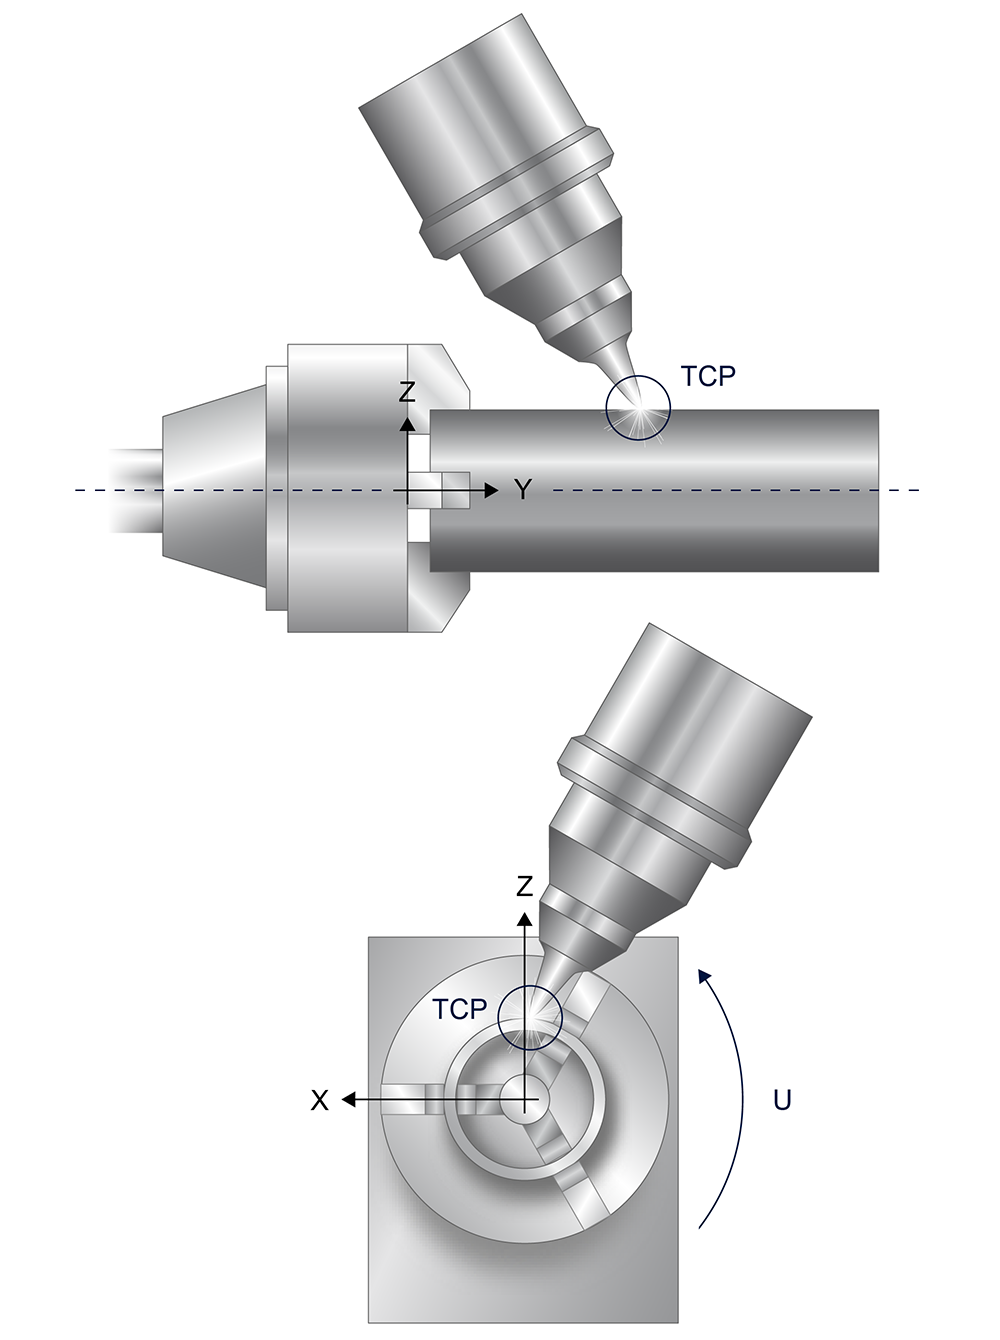 6-axis, 2 orientation axes in the tool head available 1: